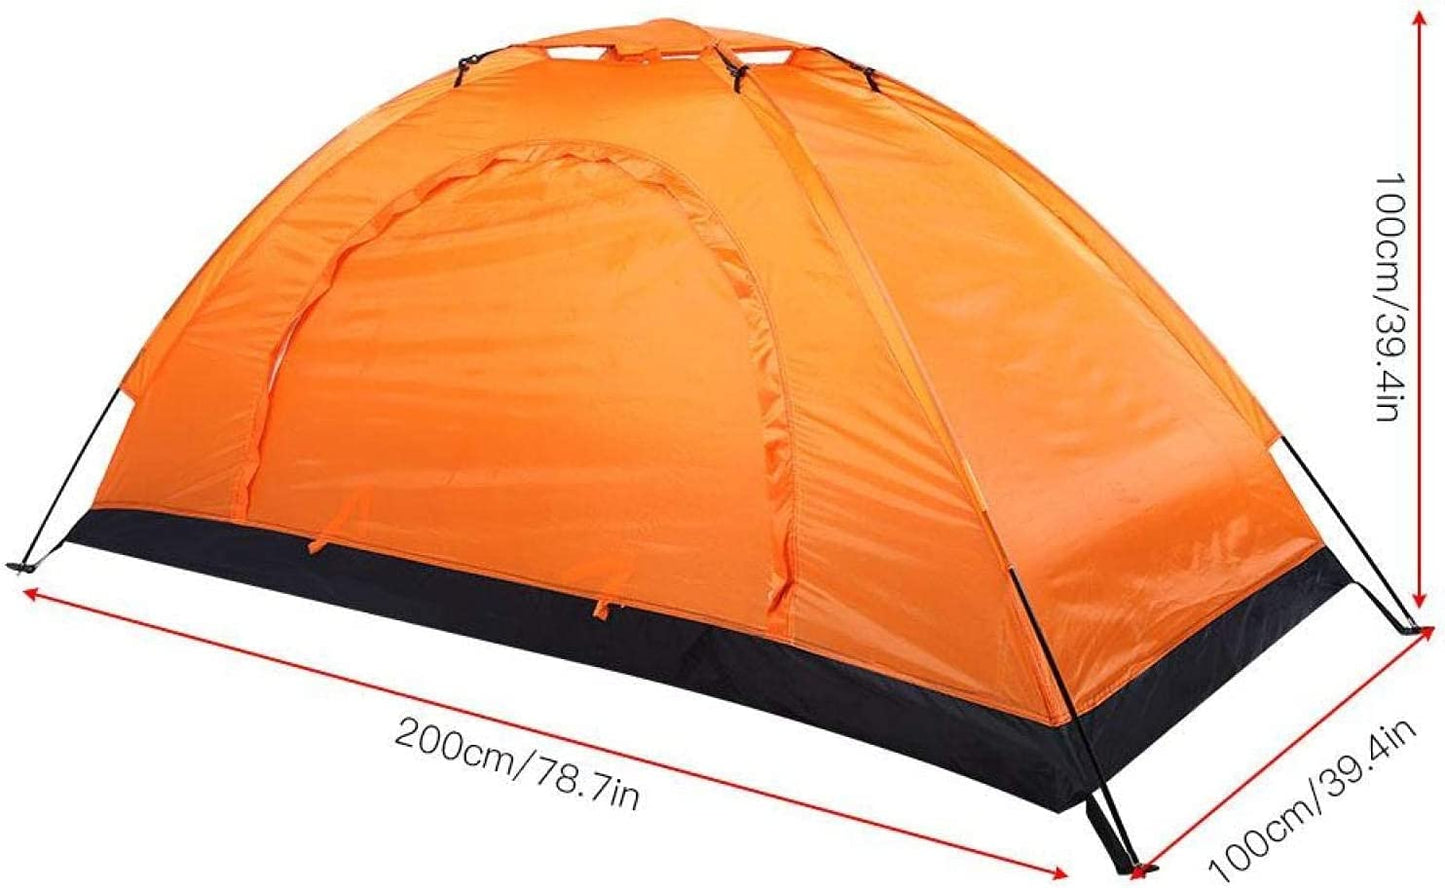 Single Person Tent for camping, hiking